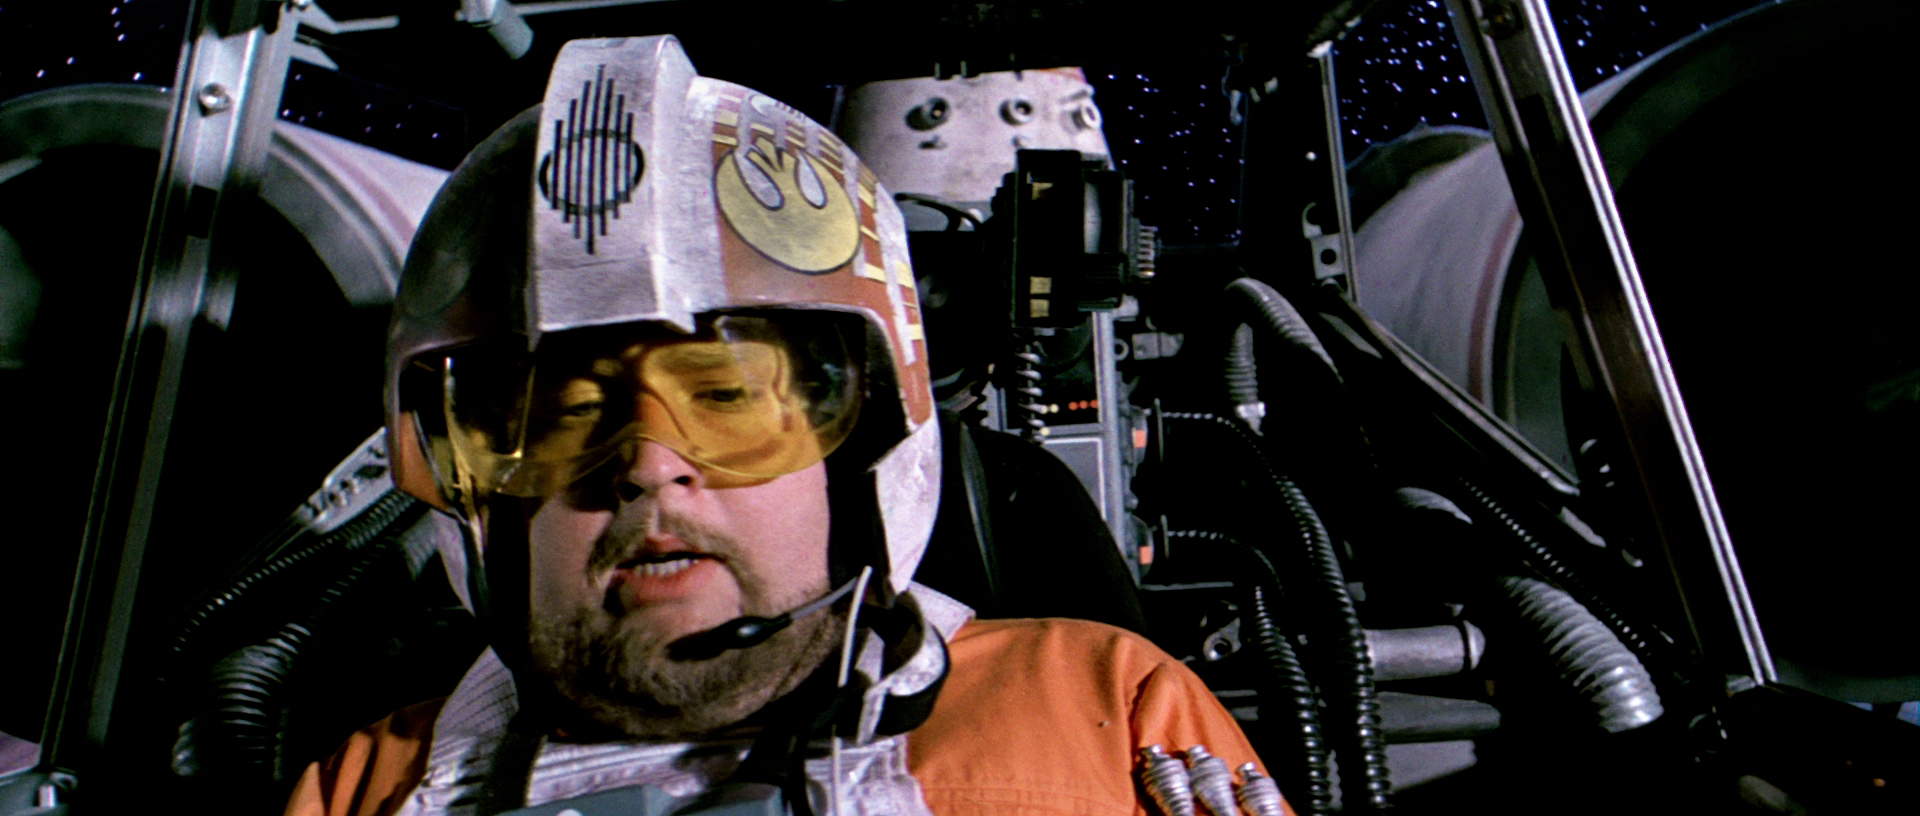 need to talk about Porkins